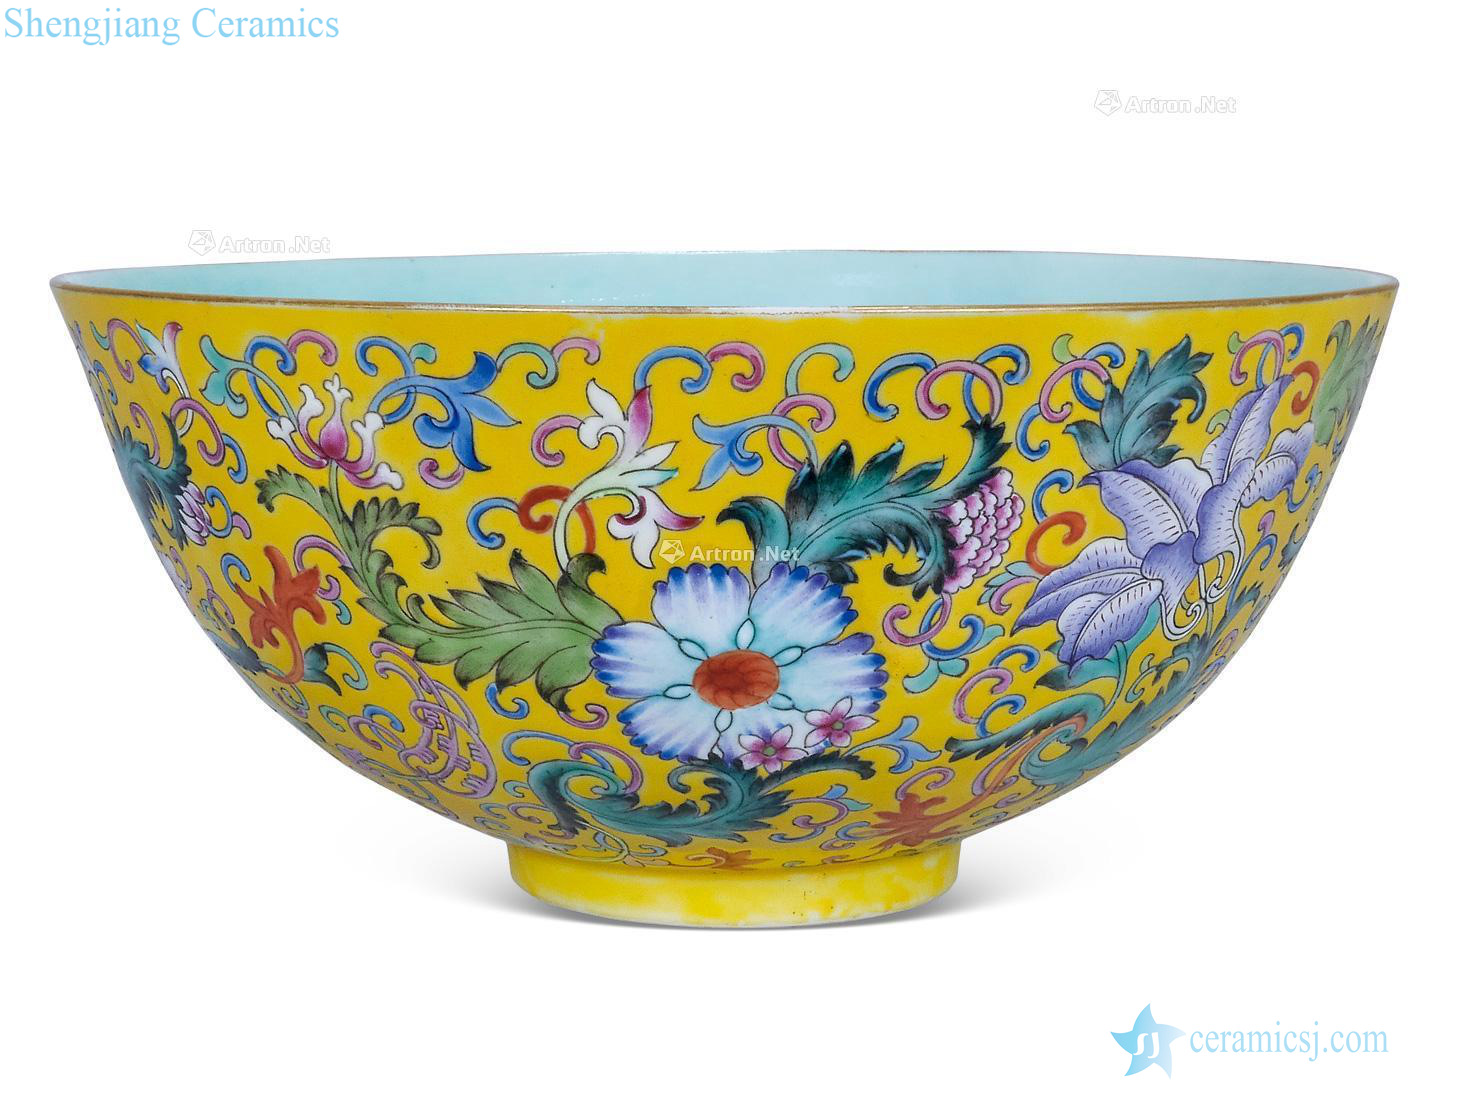 Qing jiaqing To pastel yellow flowers the flavour 盌 lotus pattern